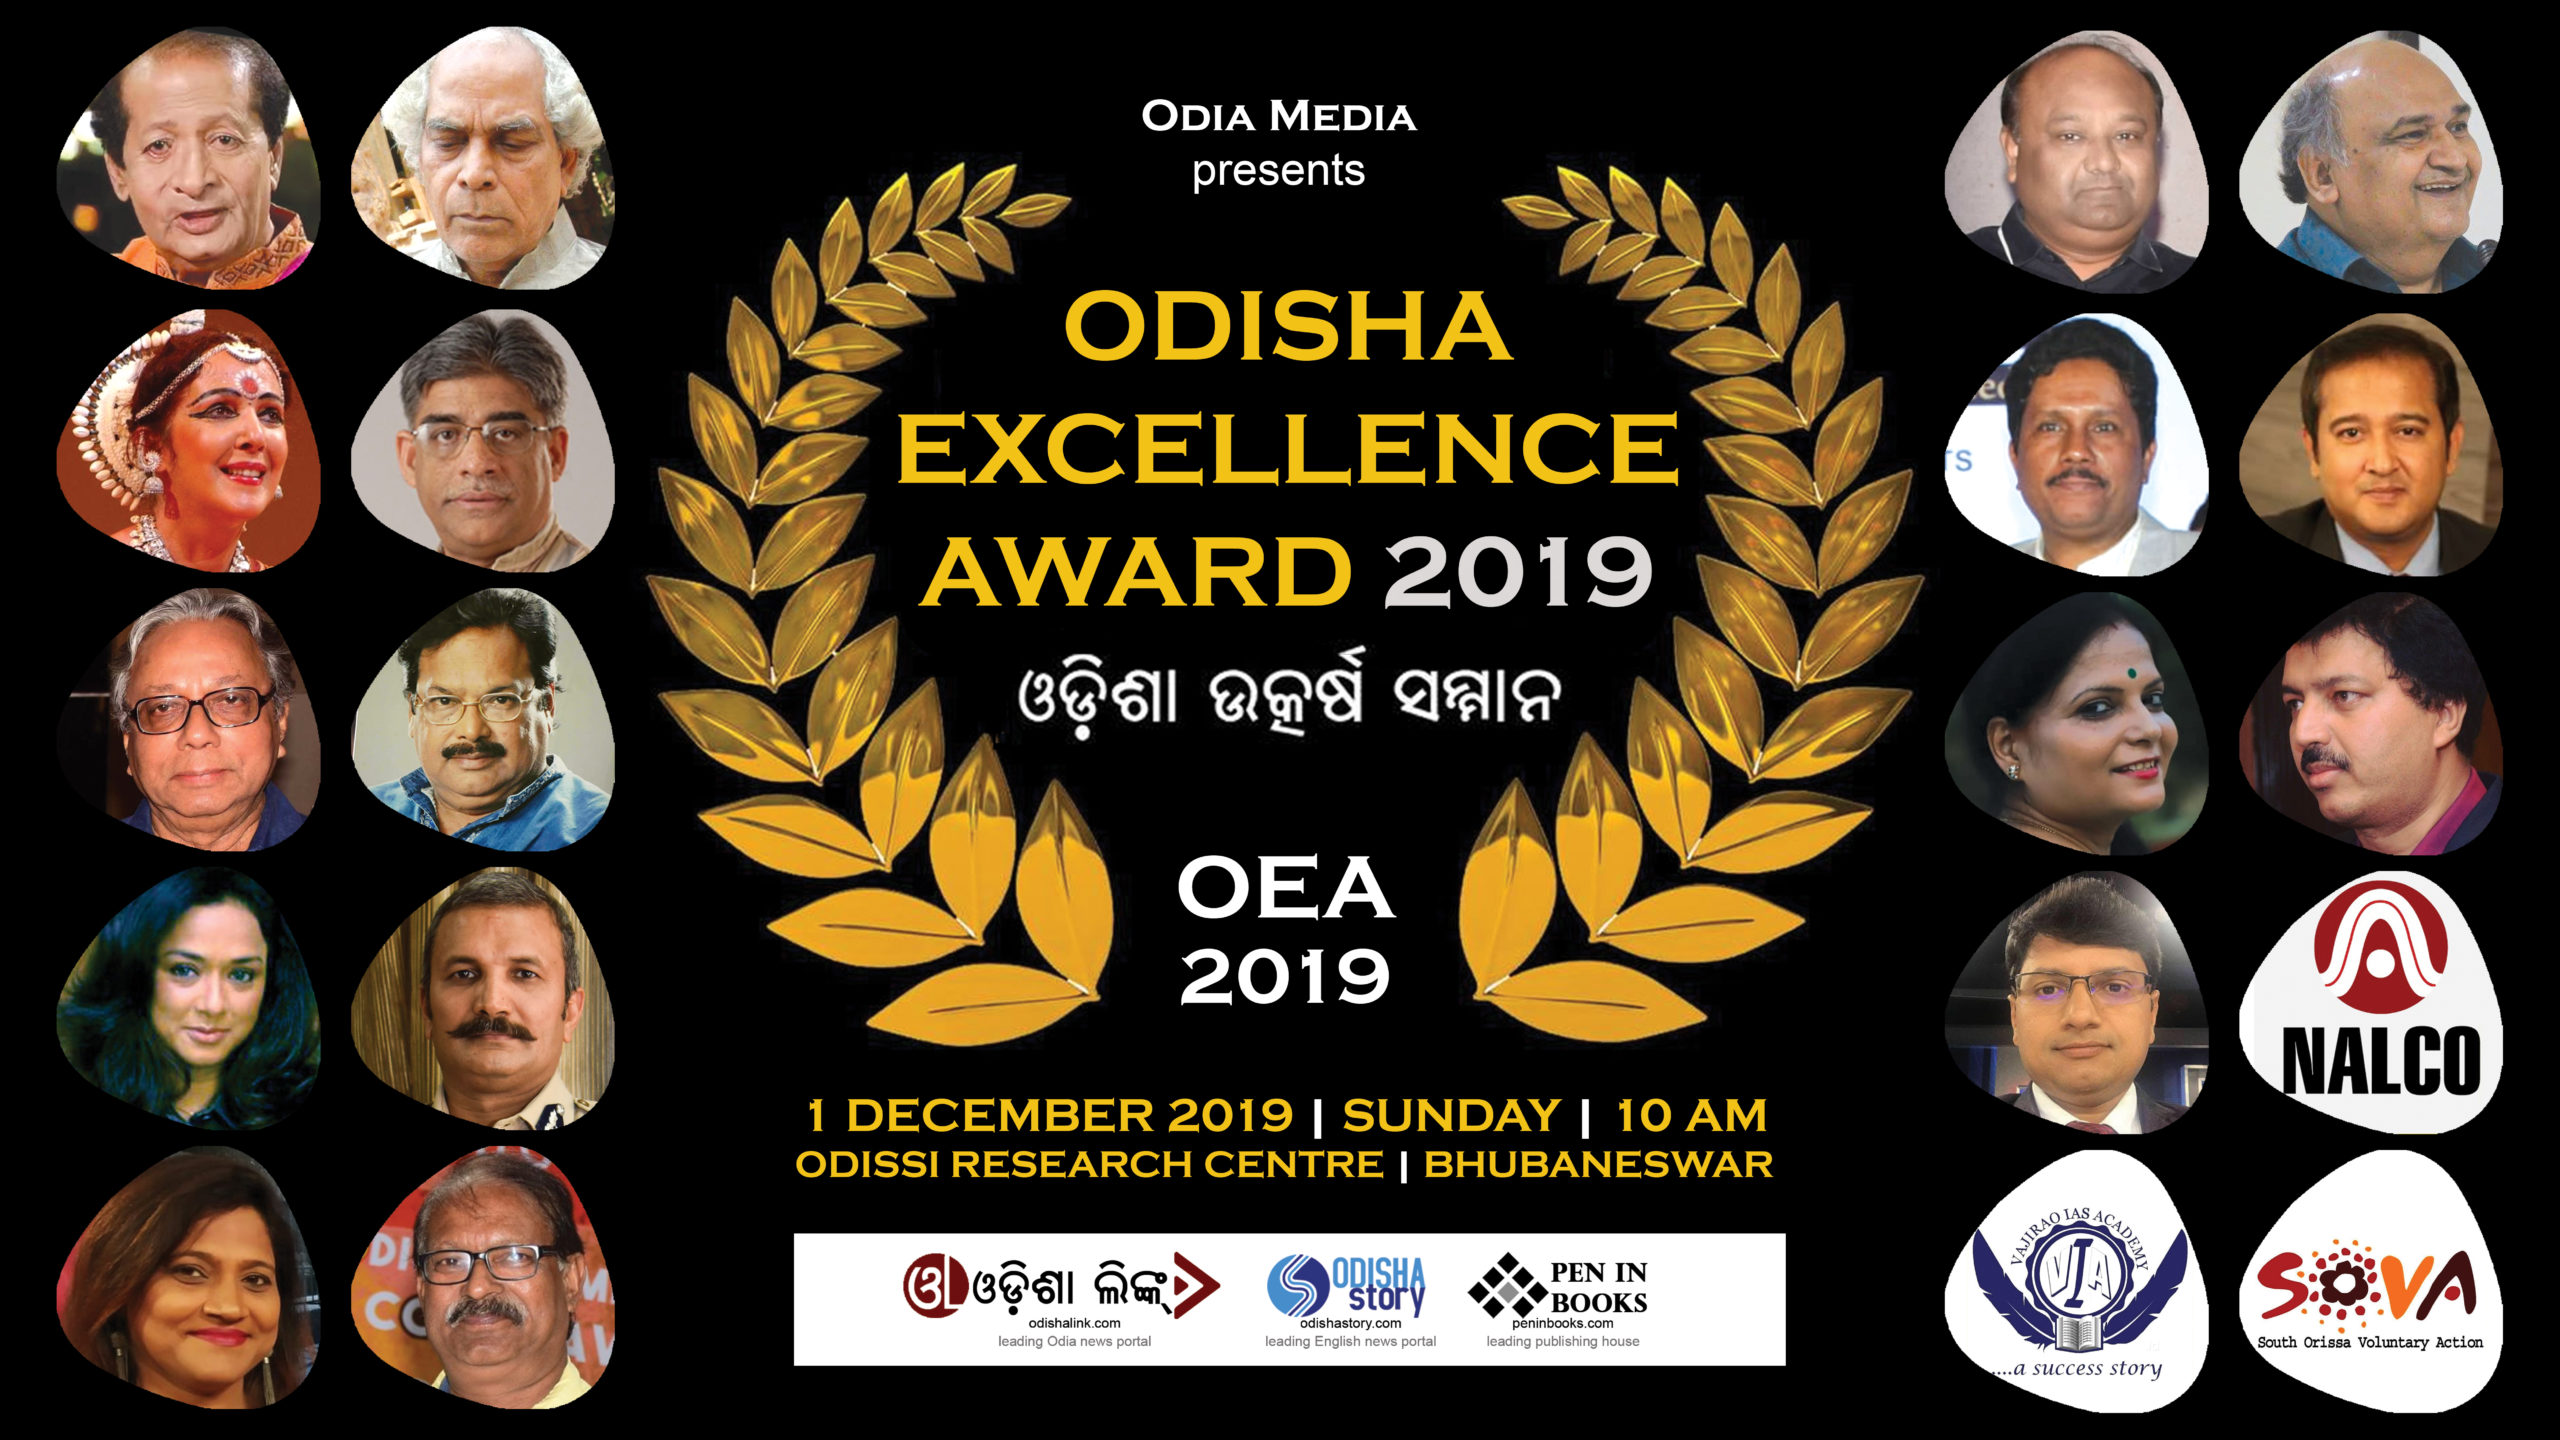 Odisha Excellence Award 2019 Announcement scaled